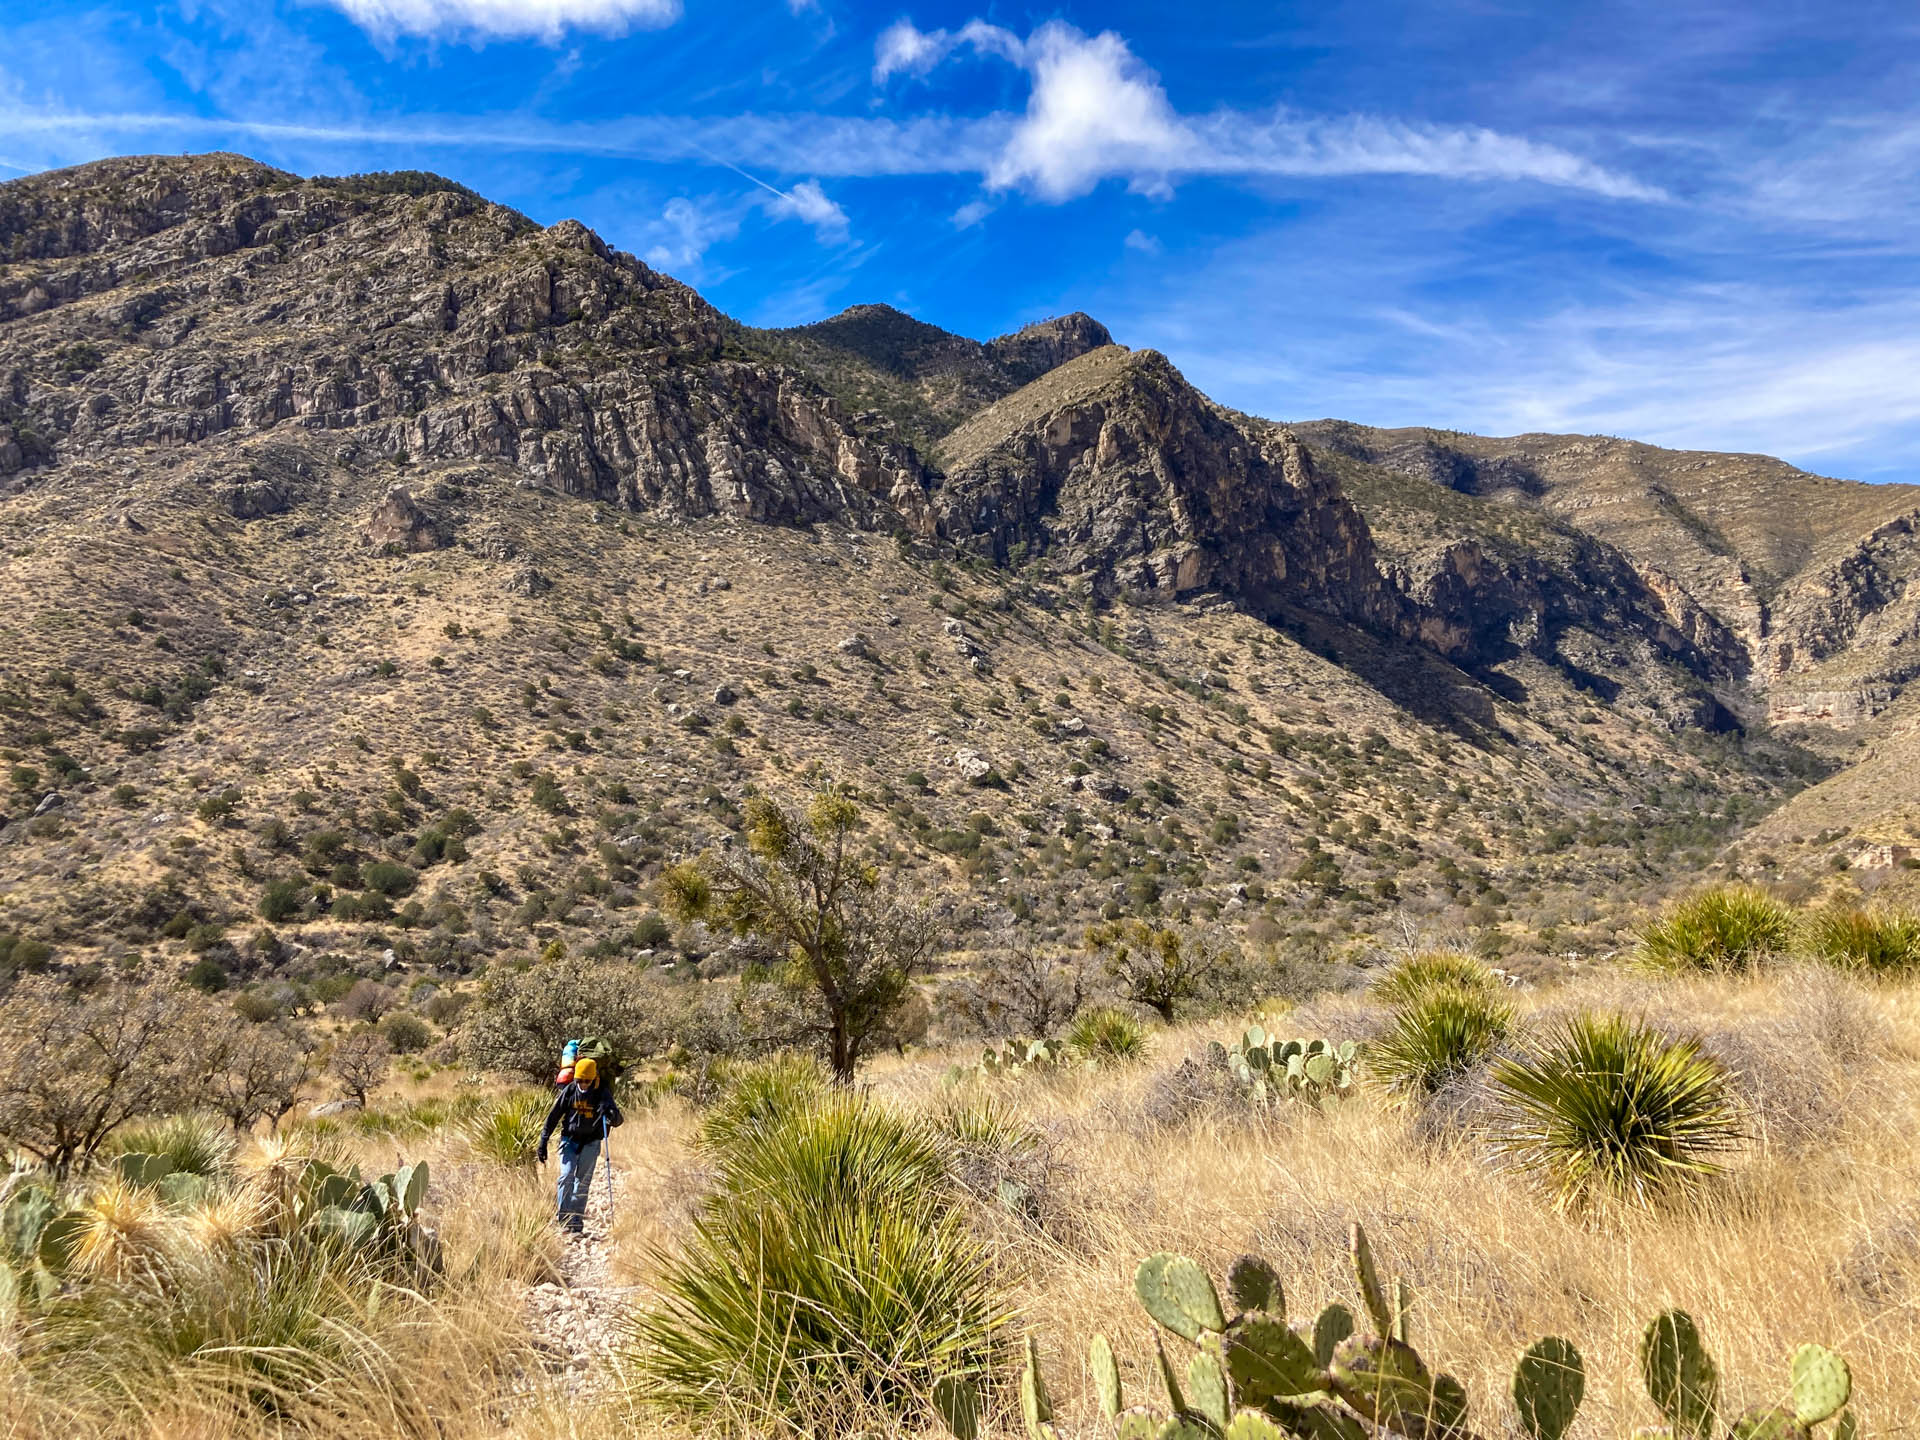  person backpacking away from mountains in Guadalupe Mountains National Park.